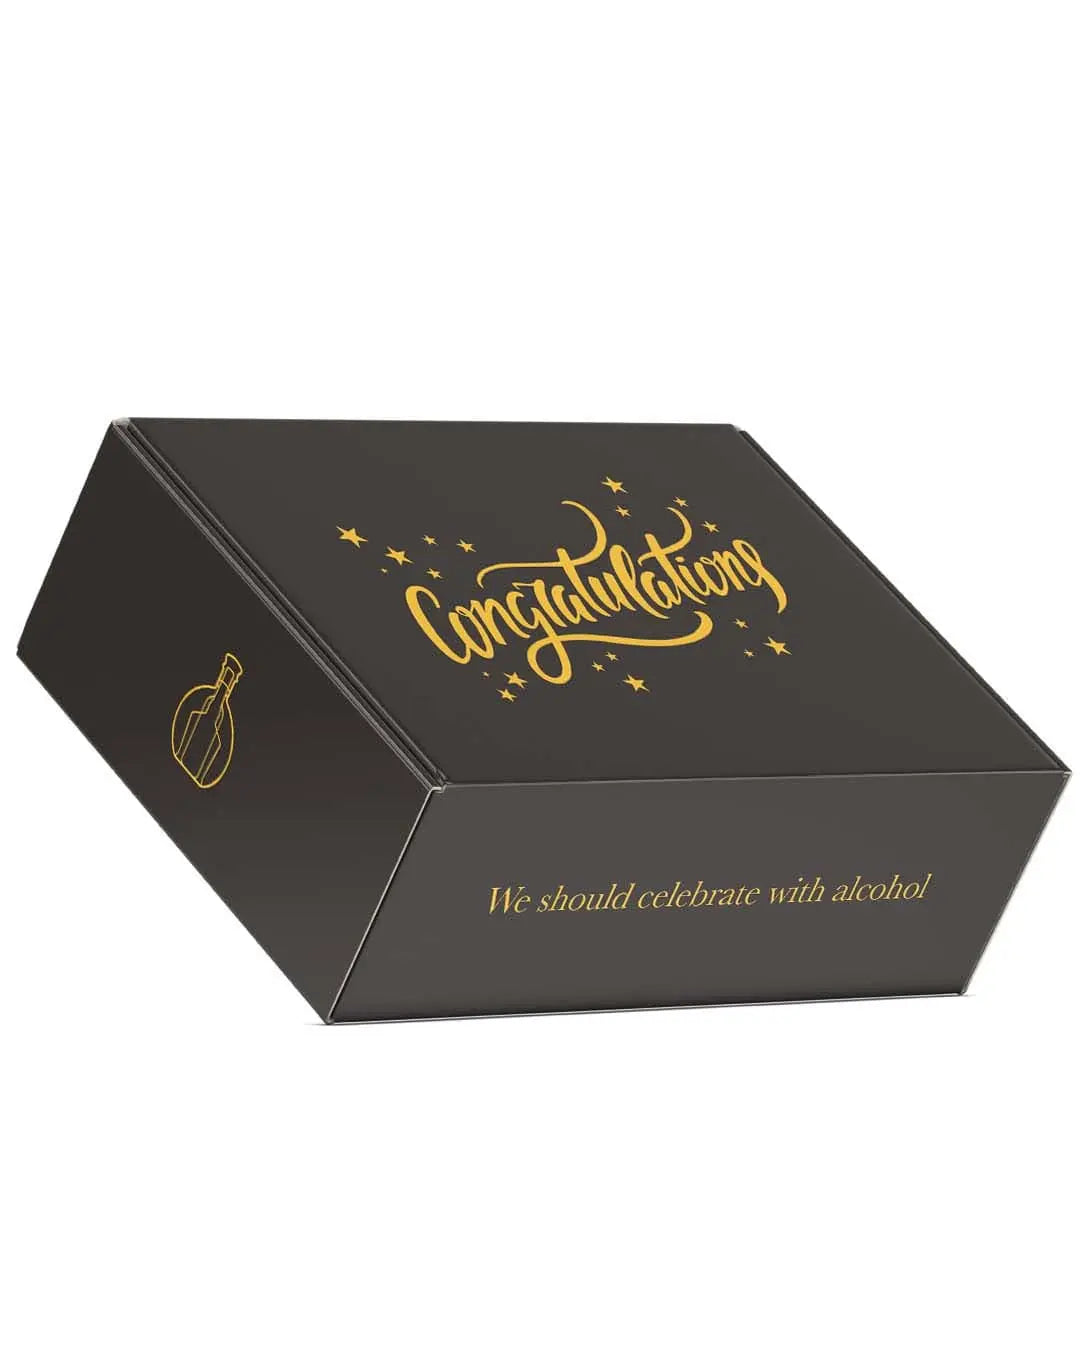 Congratulations Gift Box - Black & Gold Gift Boxes